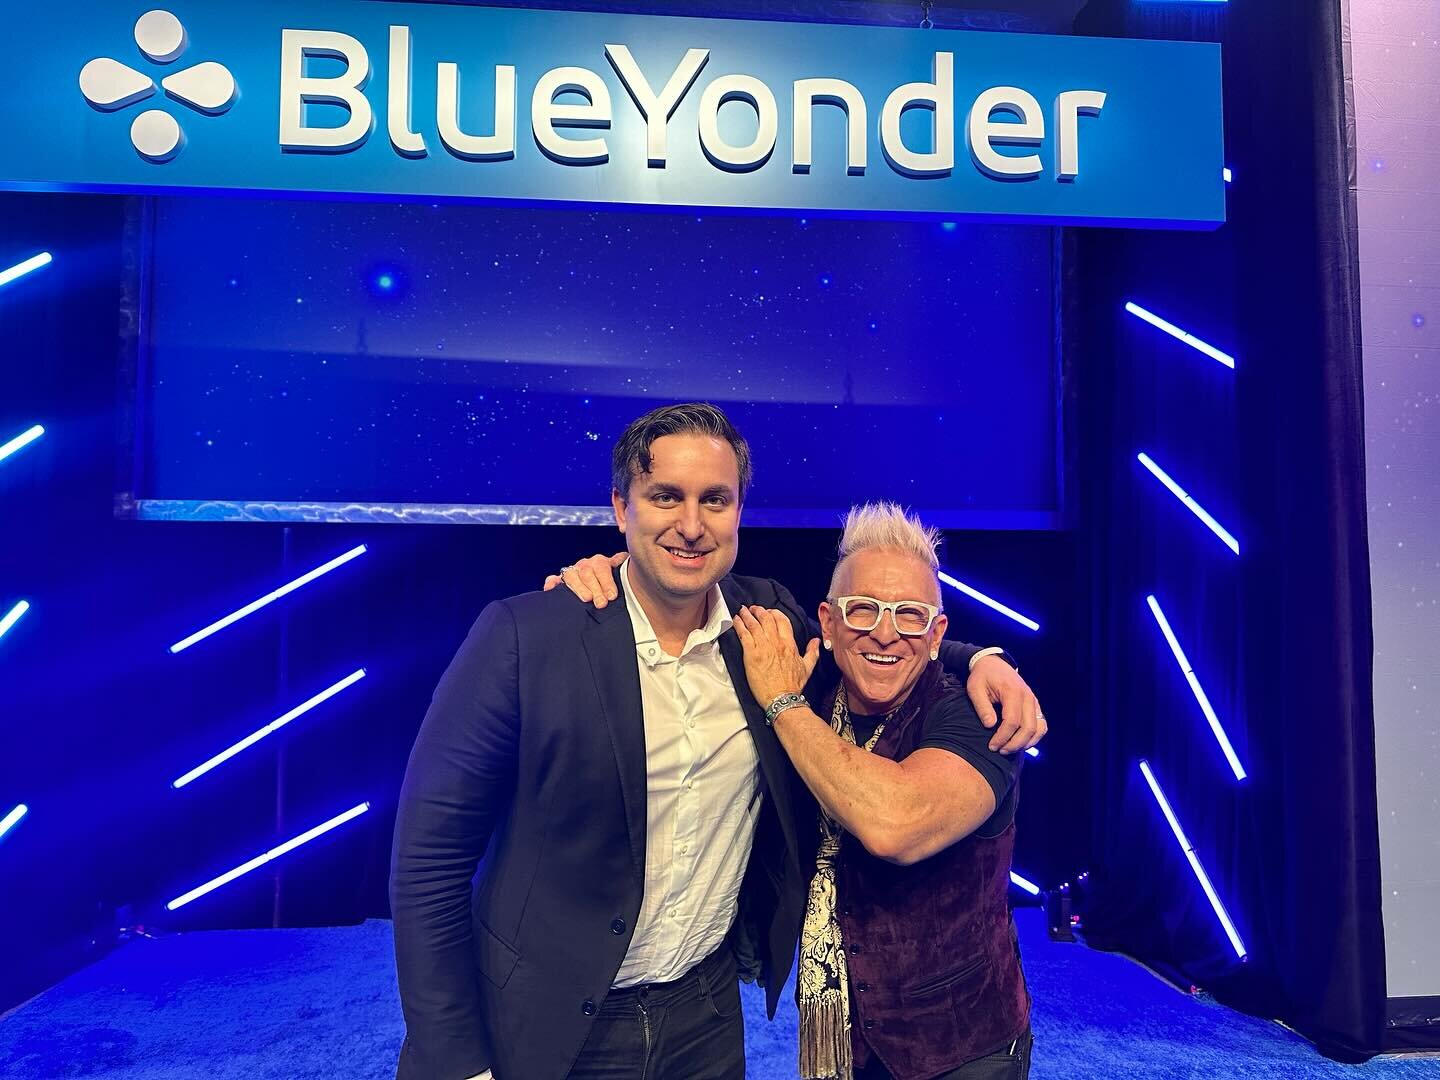 So grateful for my new friends at @blueyonder!  Being able to kickoff their year to help them &ldquo;Rock It&rdquo; is an honor for me.  People are at the heart of every organization and from the bottom of my heart, I&rsquo;m truly grateful to have m